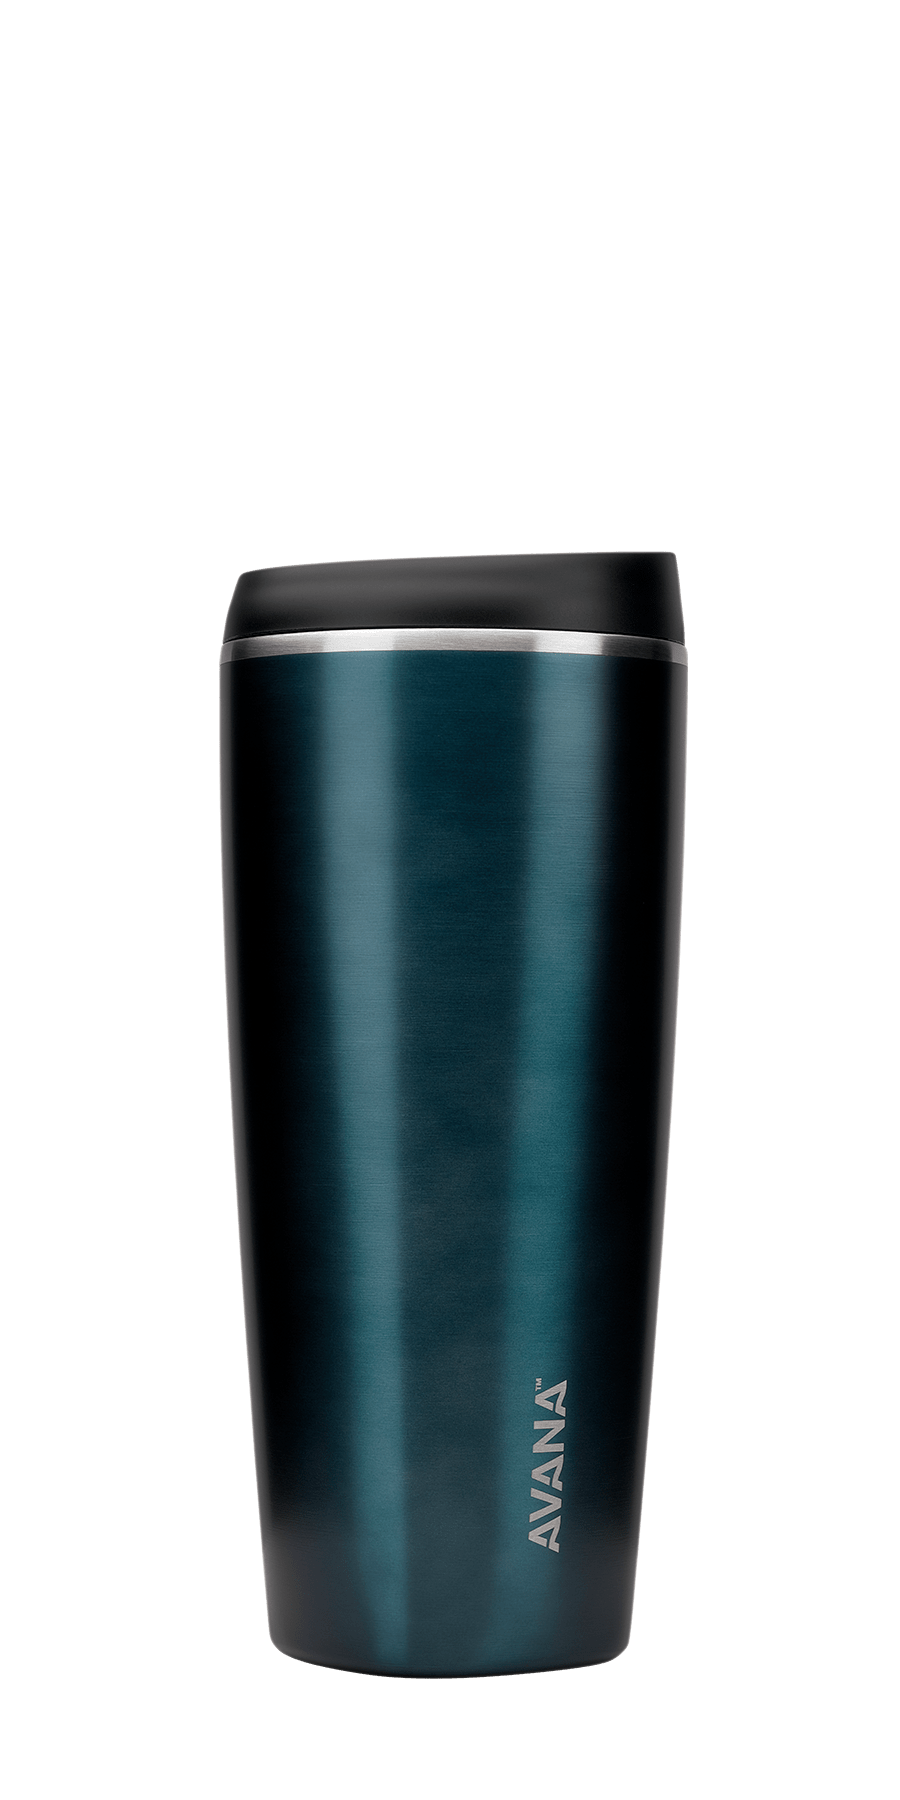 Avana Water Bottle with Built-In Straw Review